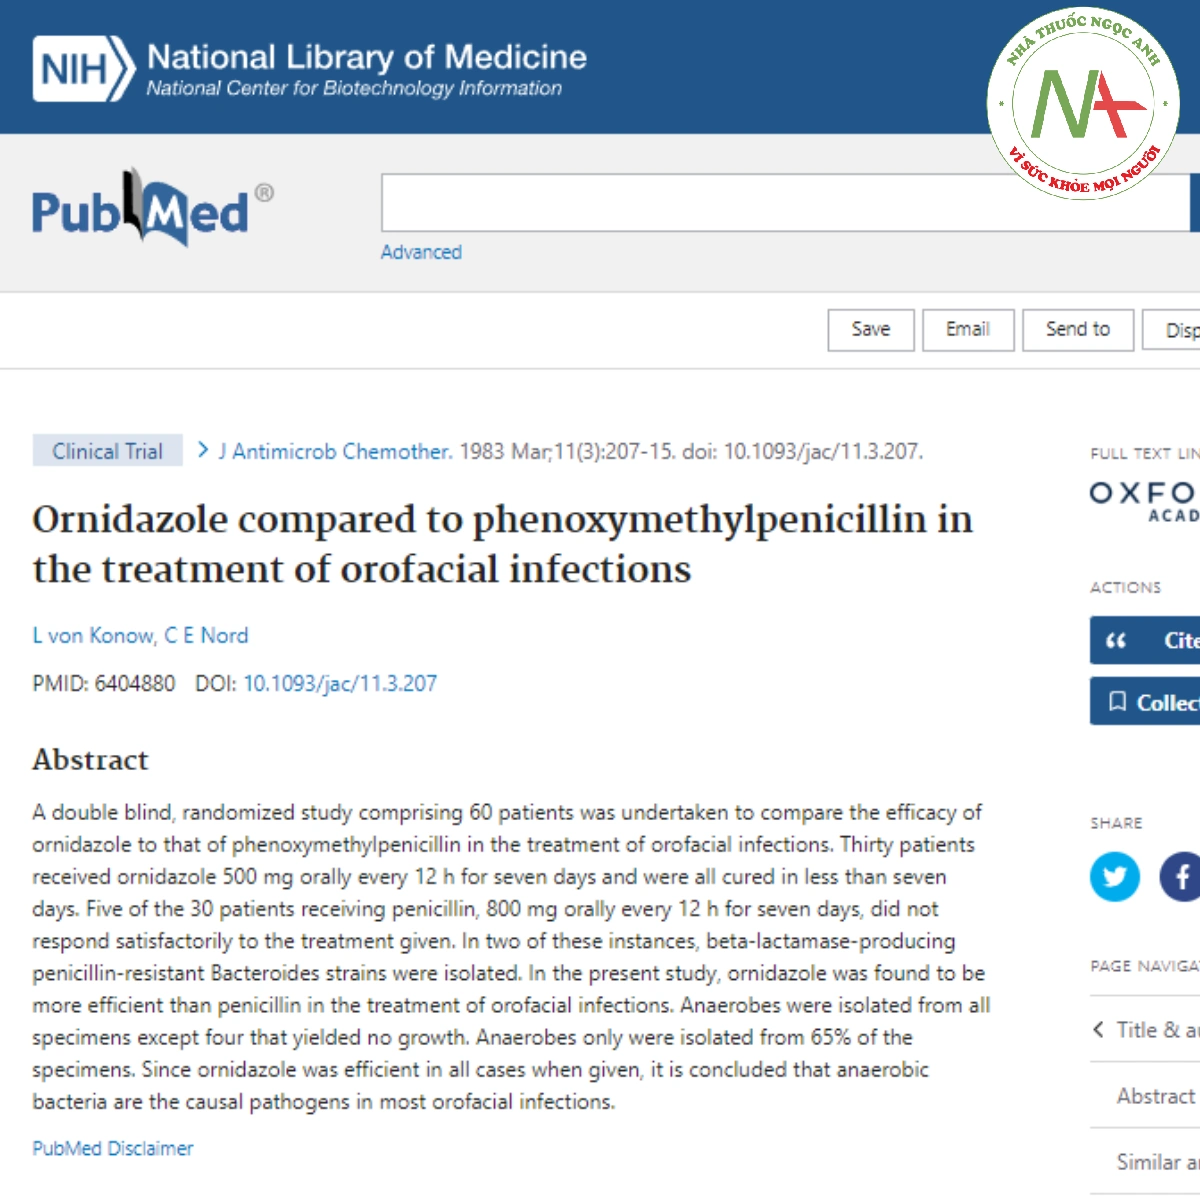 Ornidazole compared to phenoxymethylpenicillin in the treatment of orofacial infections